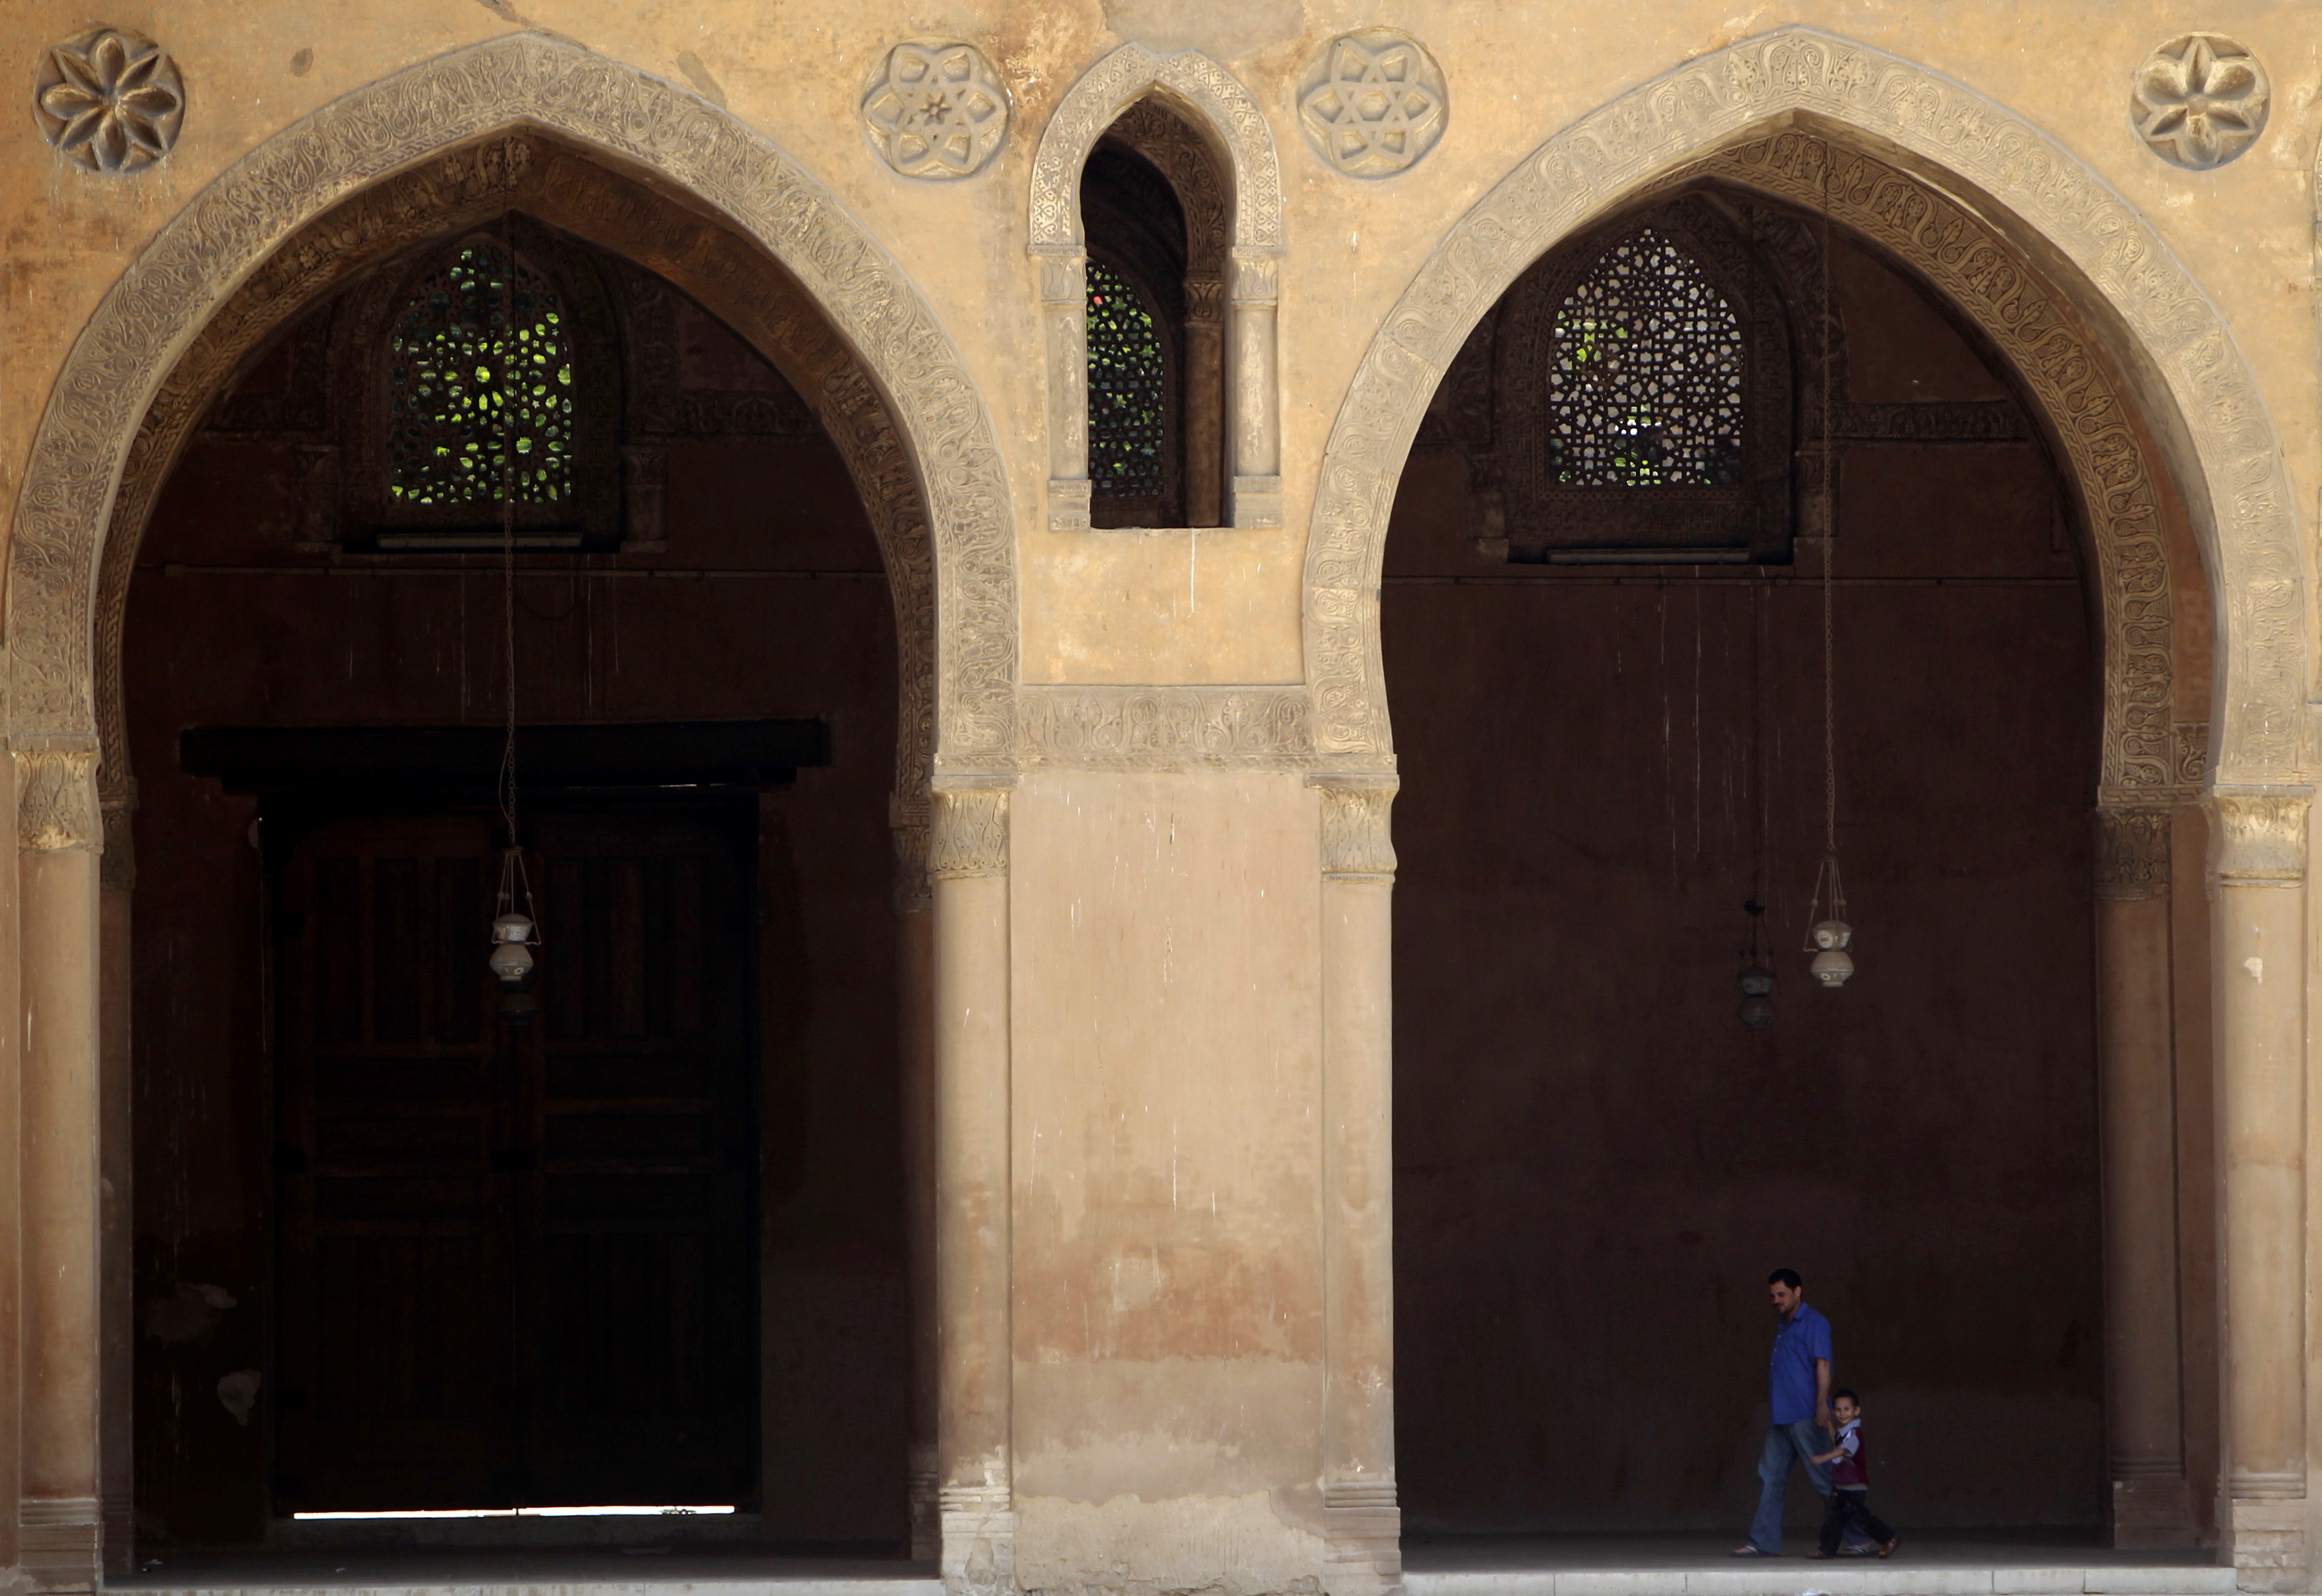  The Ibn Tulun Mosque in old Cairo, which was constructed in 897A.D, is one the oldest and largest mosques in the world July, 2012 (Reuters)